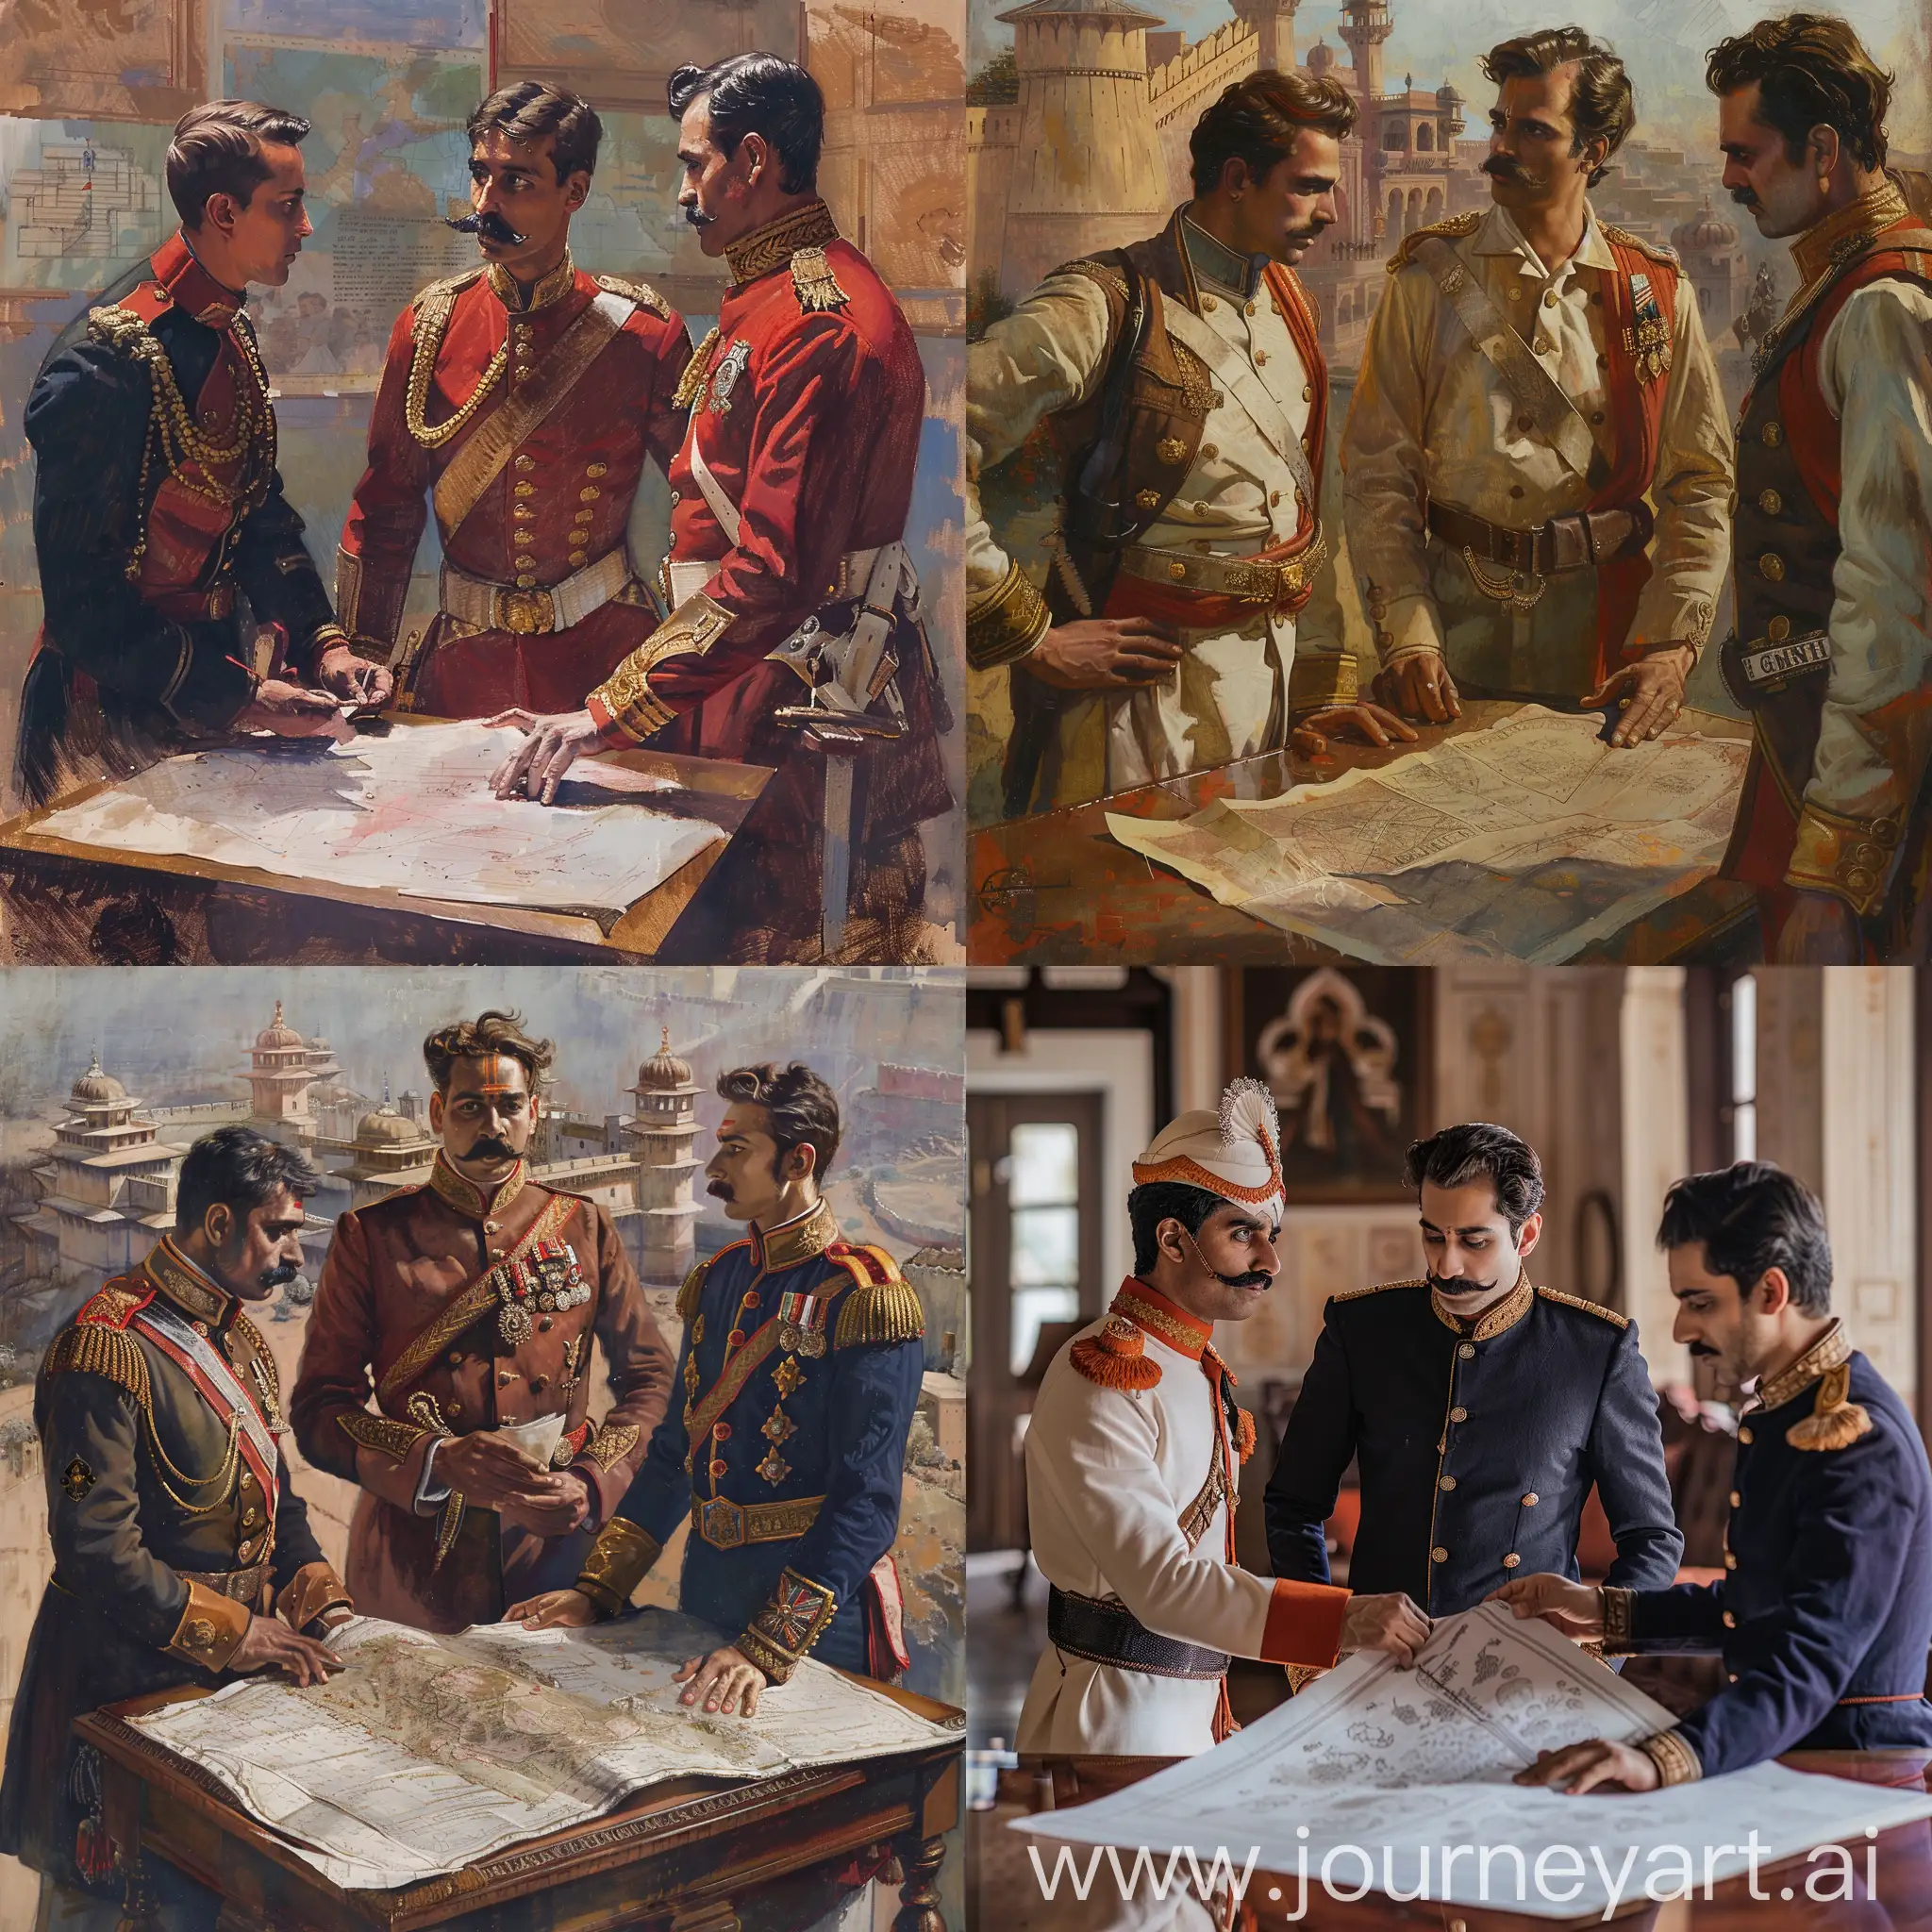 Year 1900 CE, Rajput king Maharaja Ganga Singh, young with a moustache is being explained a plan by his 2 english officers. The plan is on the table and they are looking at it.